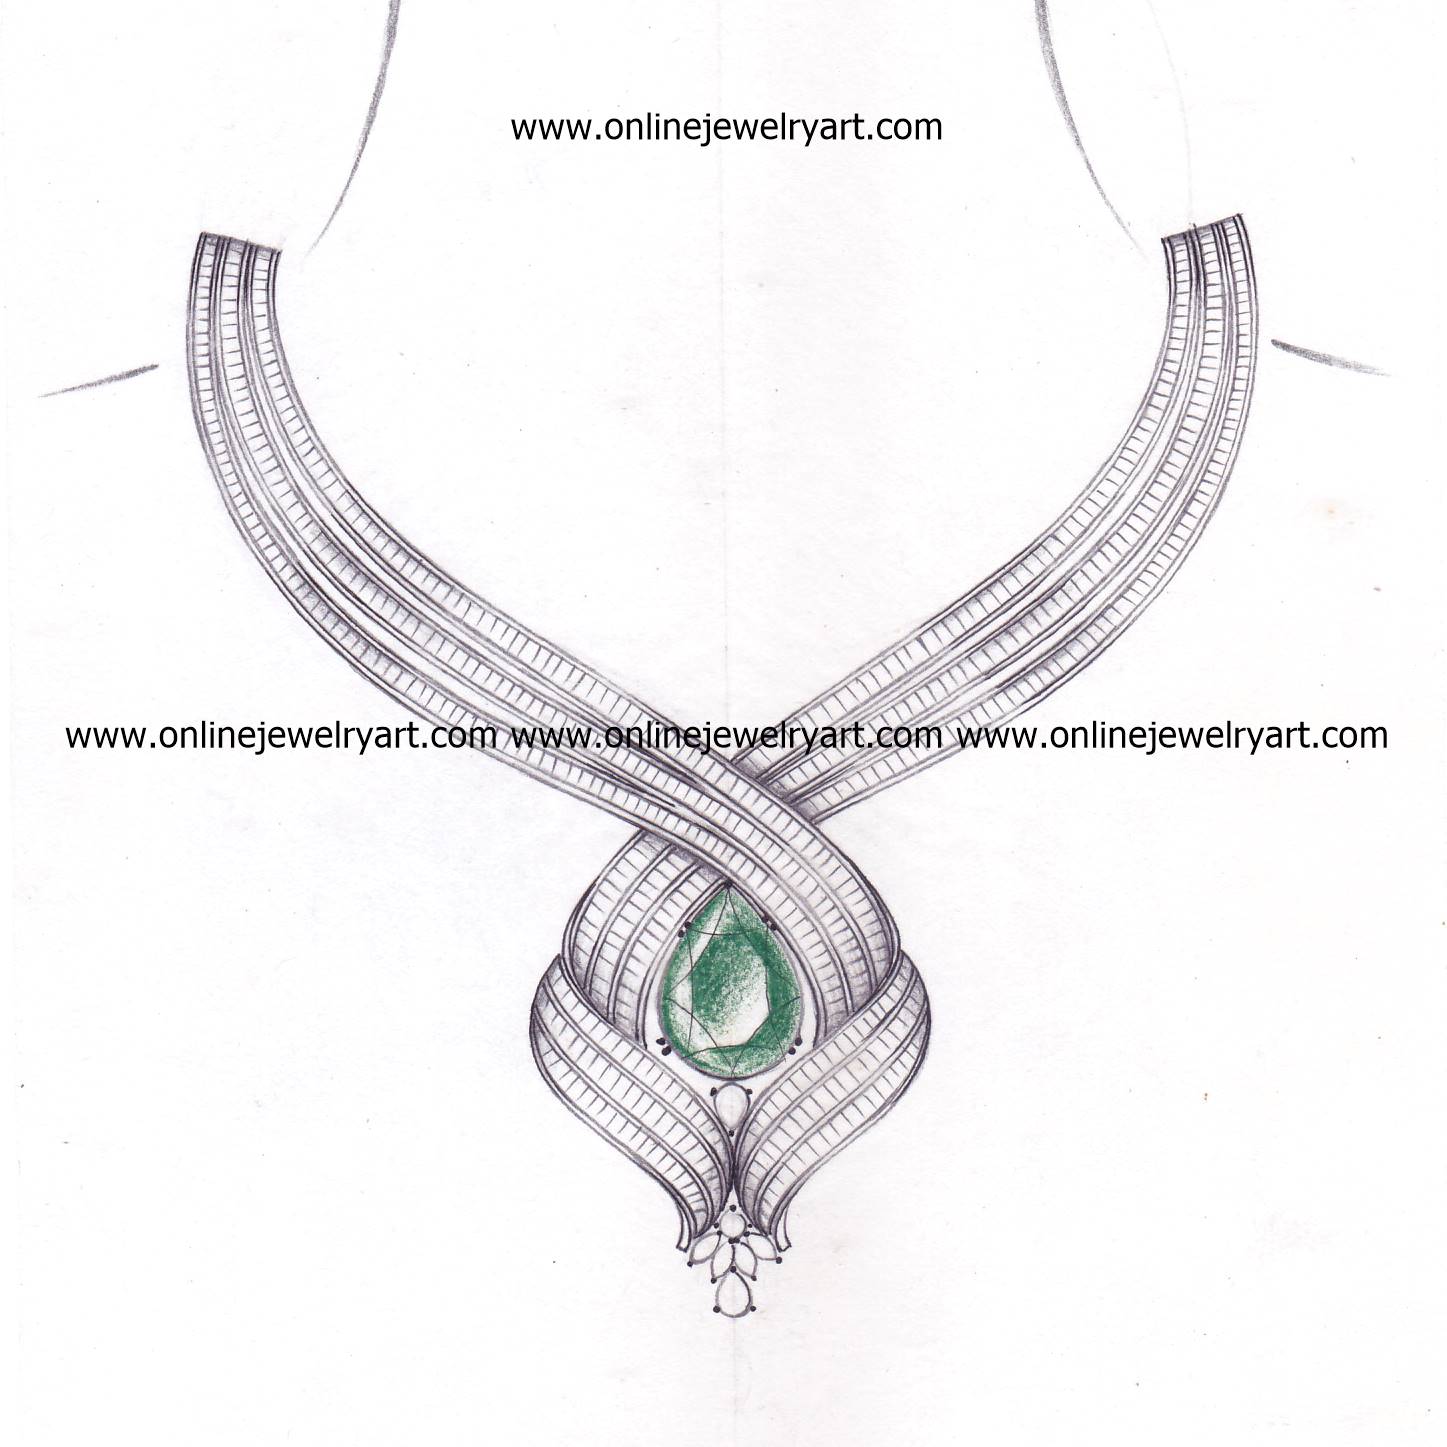 Necklace  Jewelry drawing Jewelry design drawing Jewellery design  sketches